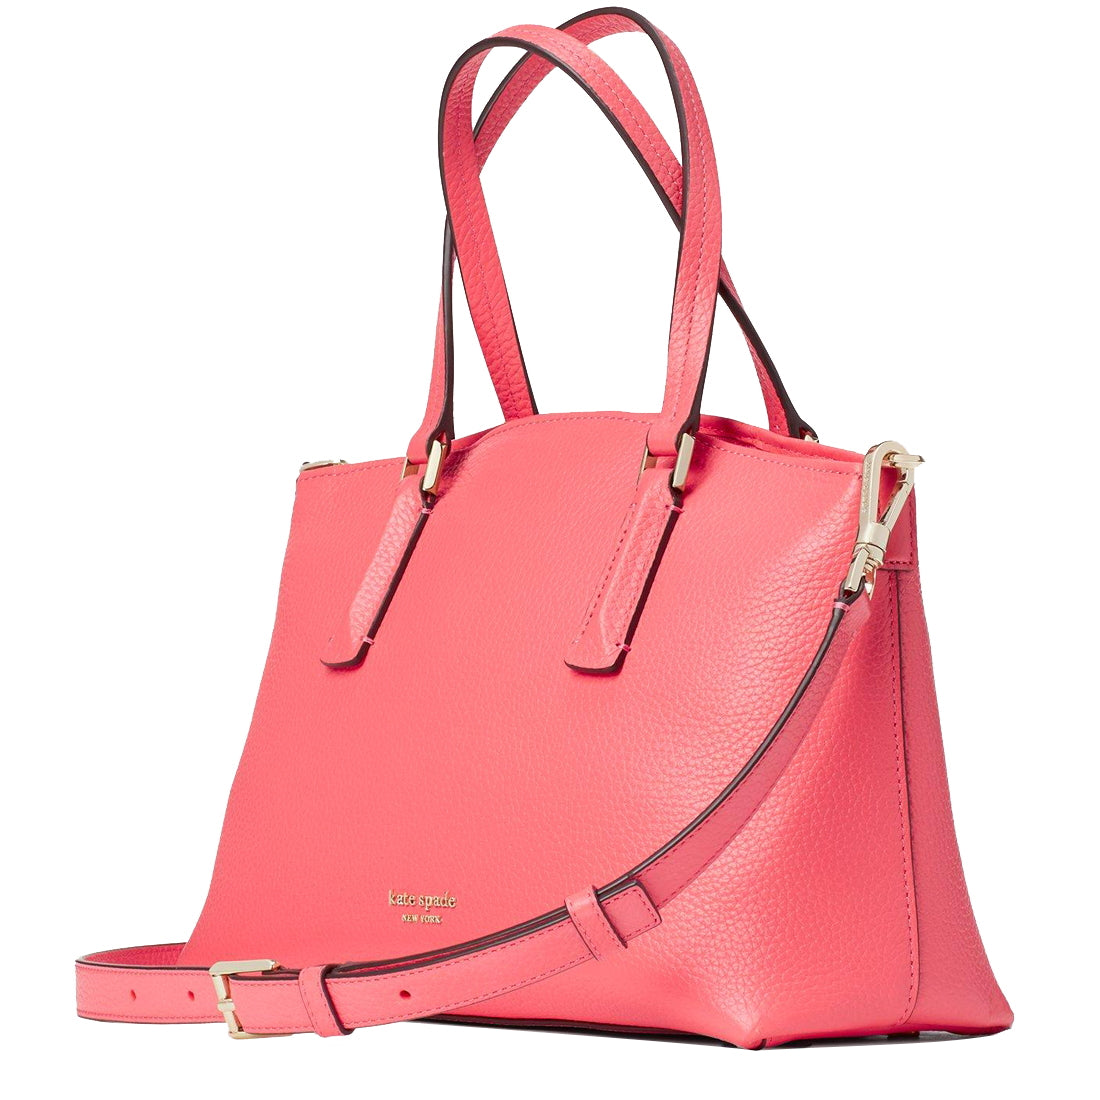 Kate Spade Abbott Small Satchel Bag in Vibrant Coral – PinkOrchard.com